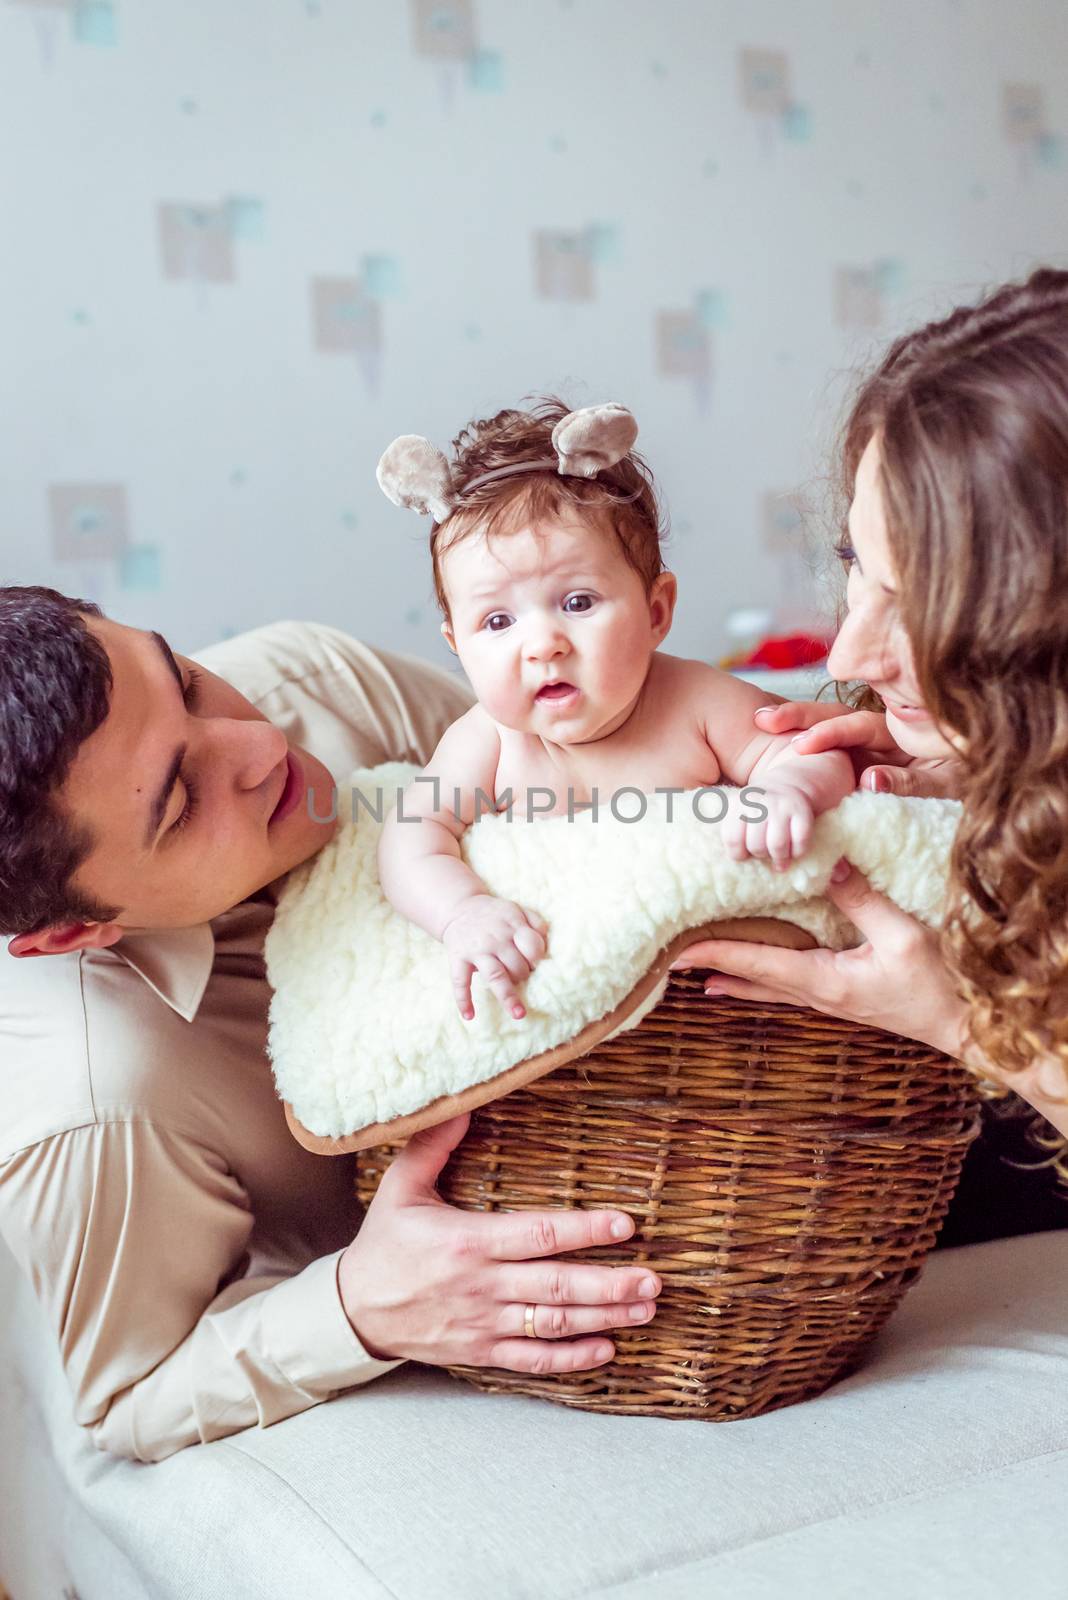 naked baby with her parents sitting in the wicker basket on the white soft blanket